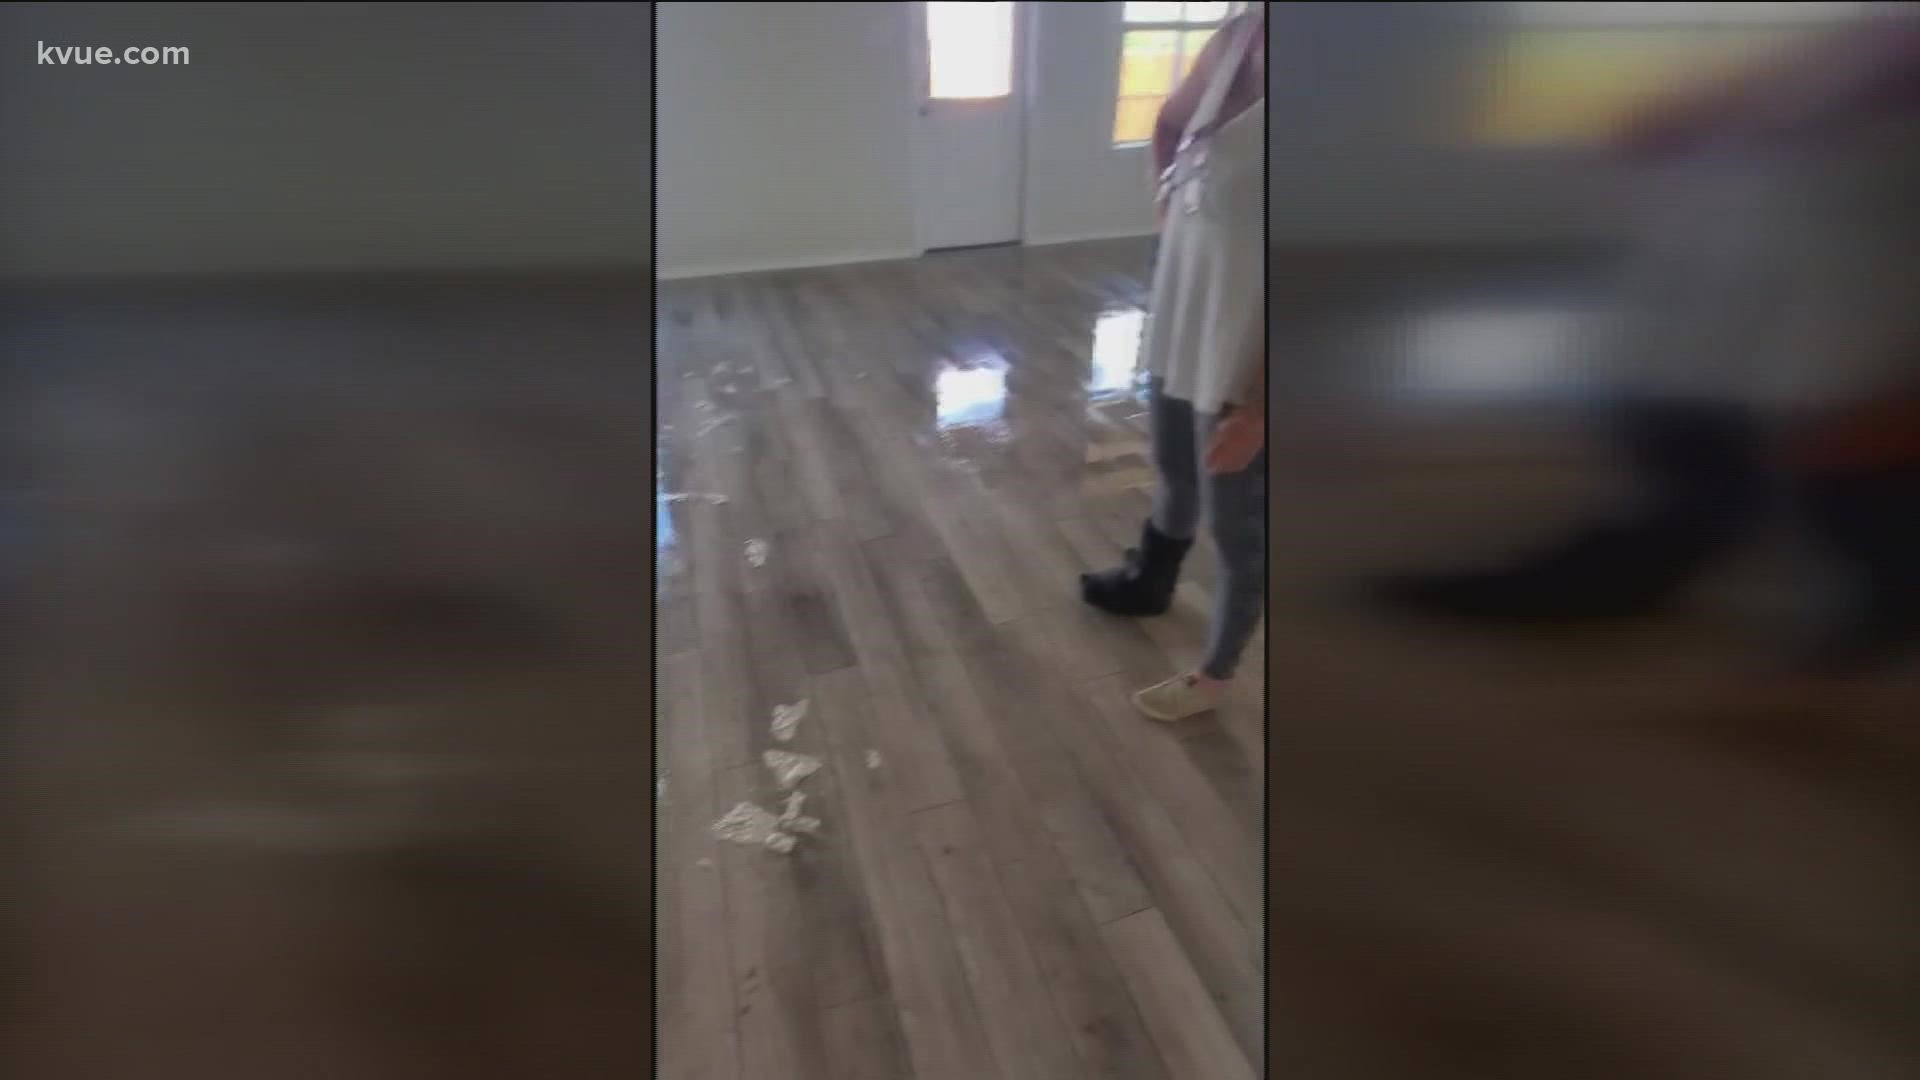 A Jarrell woman wants justice after vandals flooded her brand new home before she even moved in.